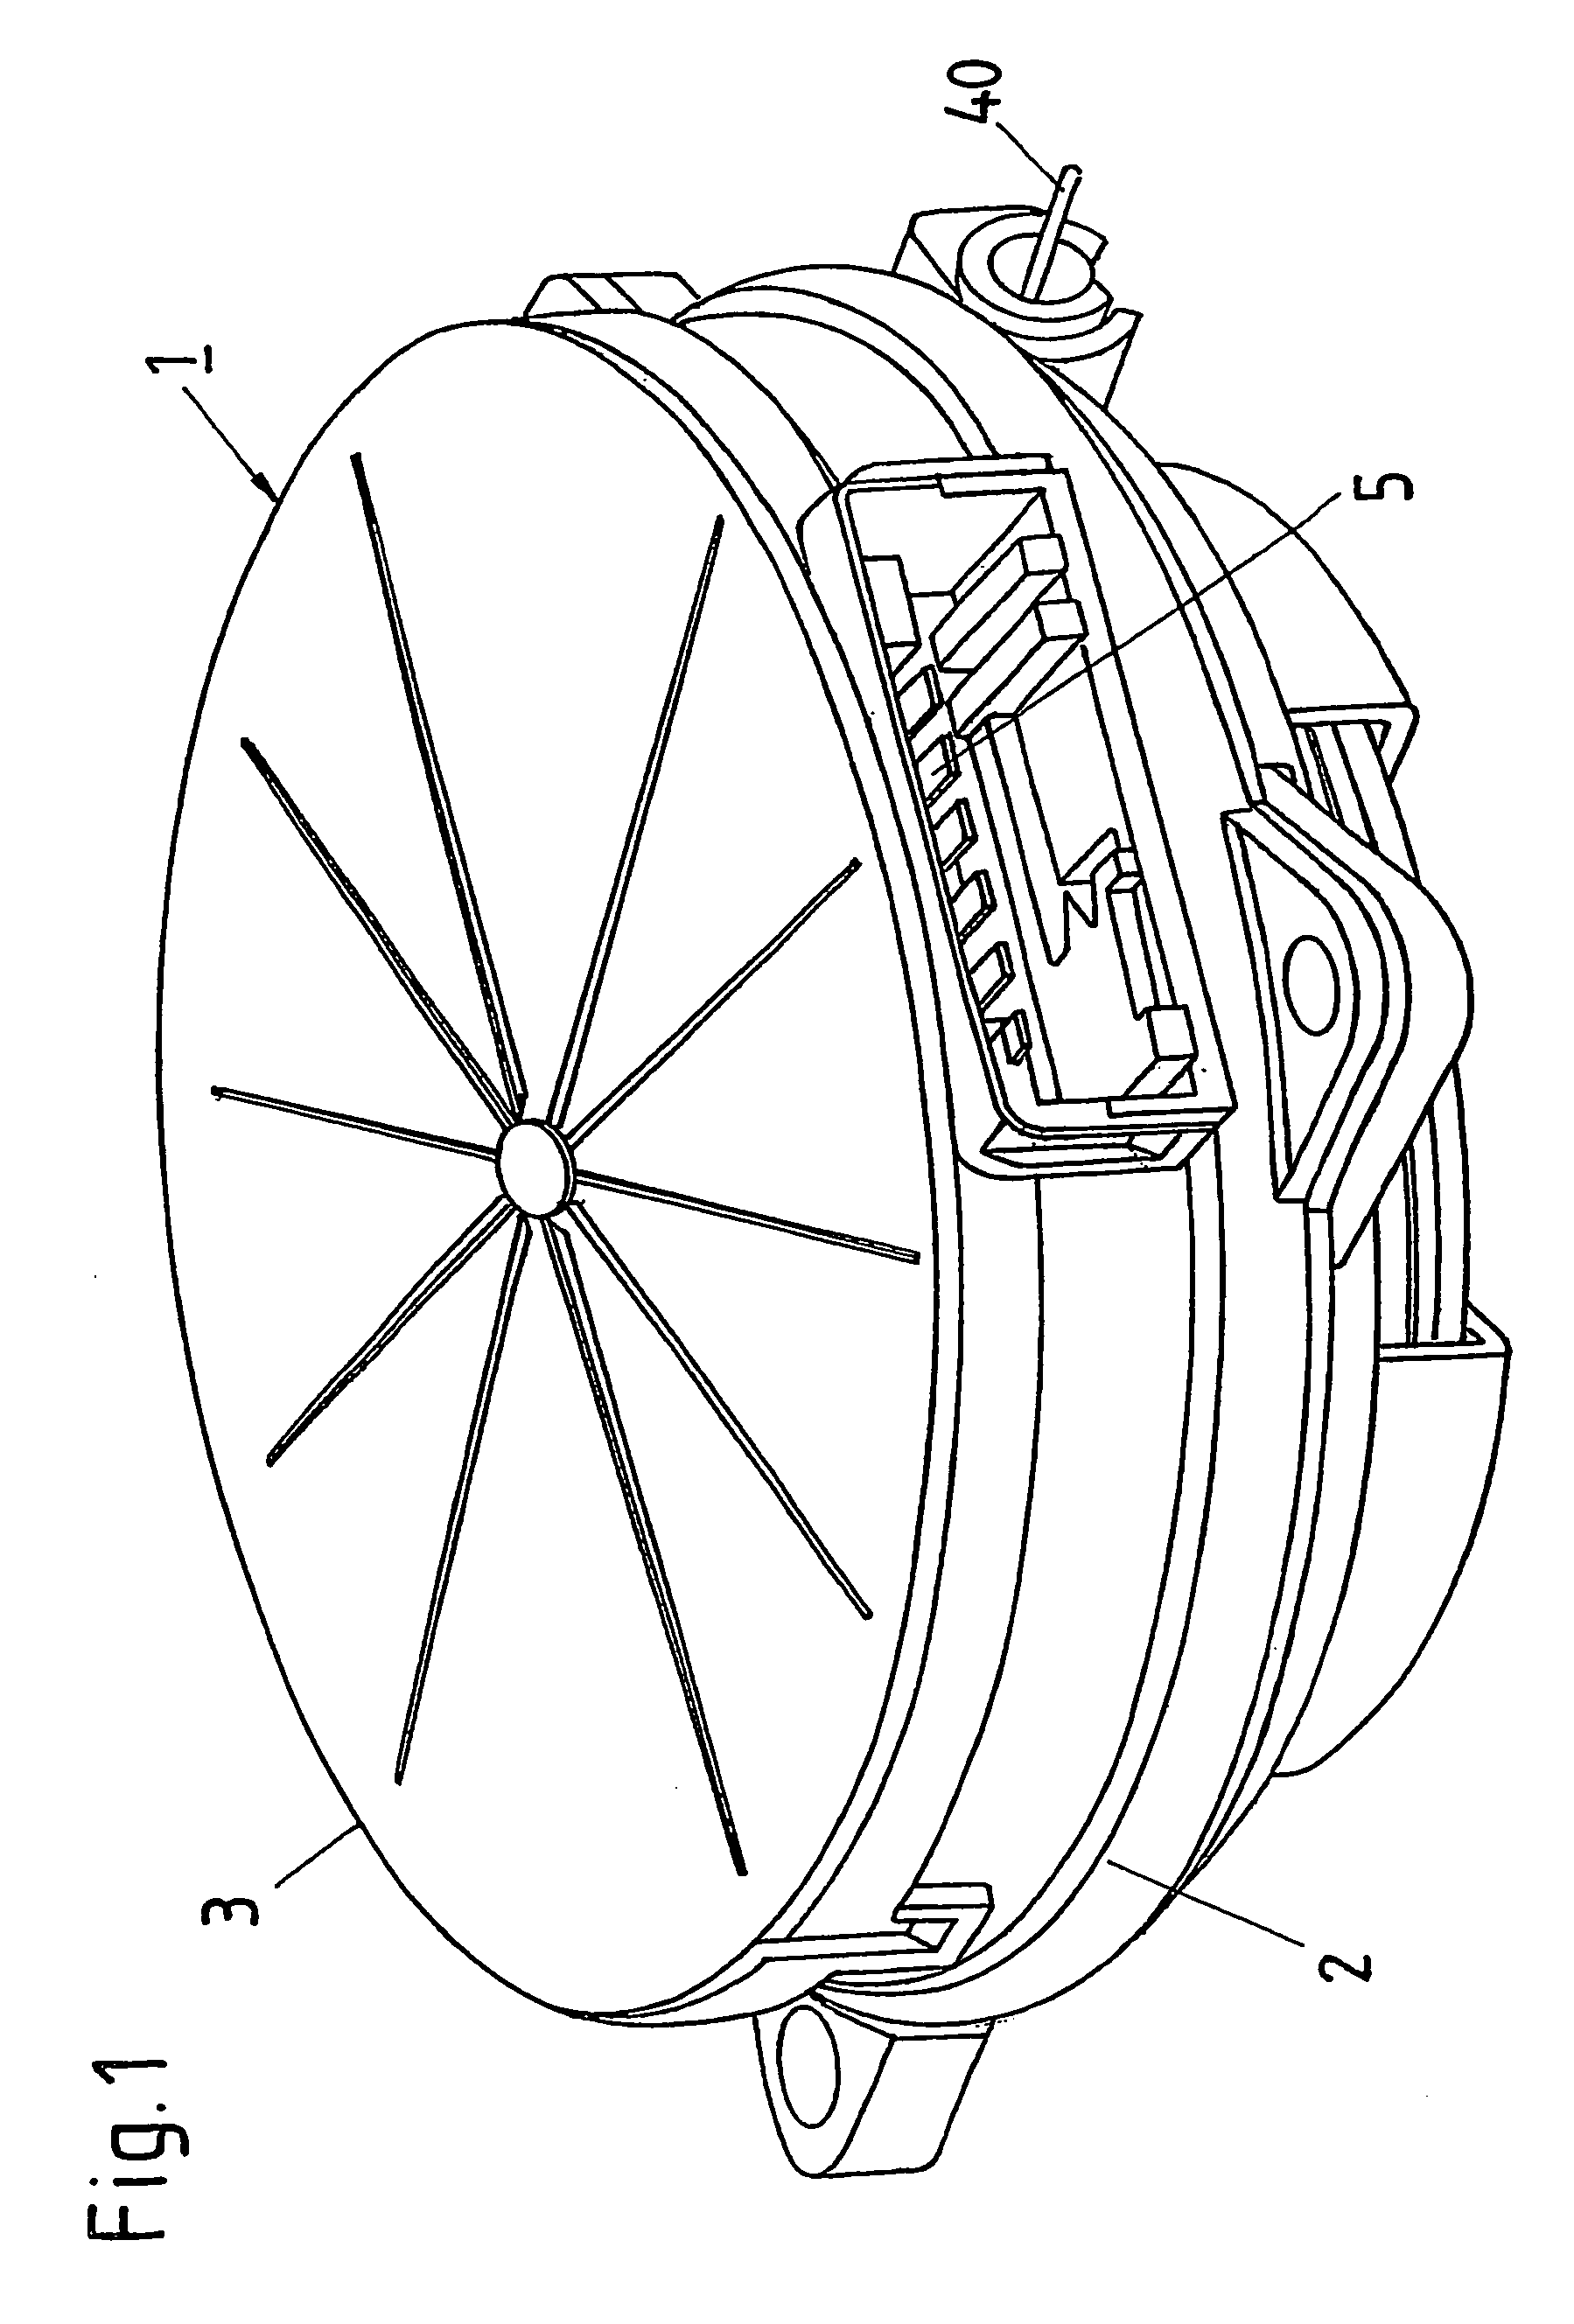 Drive unit comprising an electric motor for adjusting devices in motor vehicles